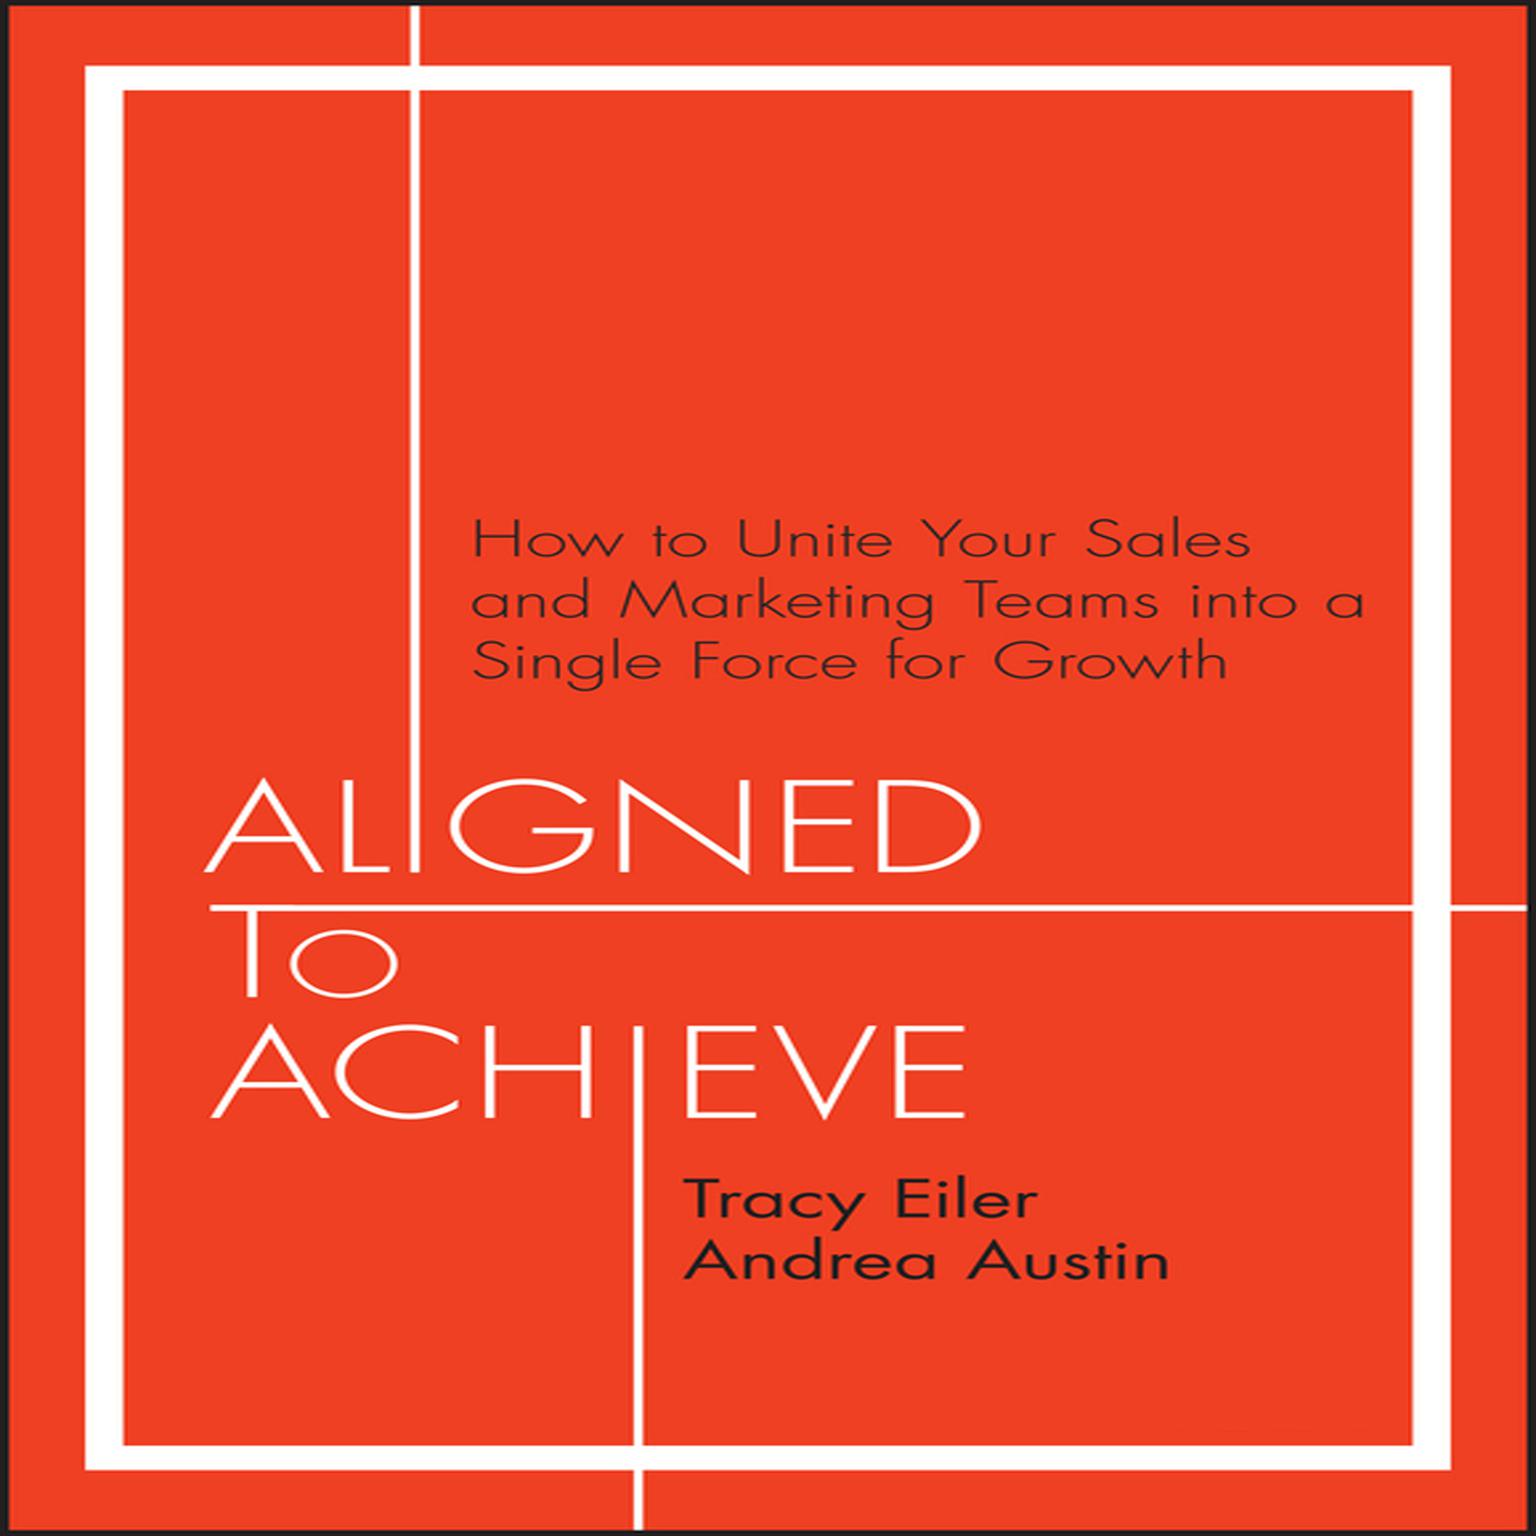 Aligned to Achieve: How to Unite Your Sales and Marketing Teams into a Single Force for Growth Audiobook, by Andrea Austin